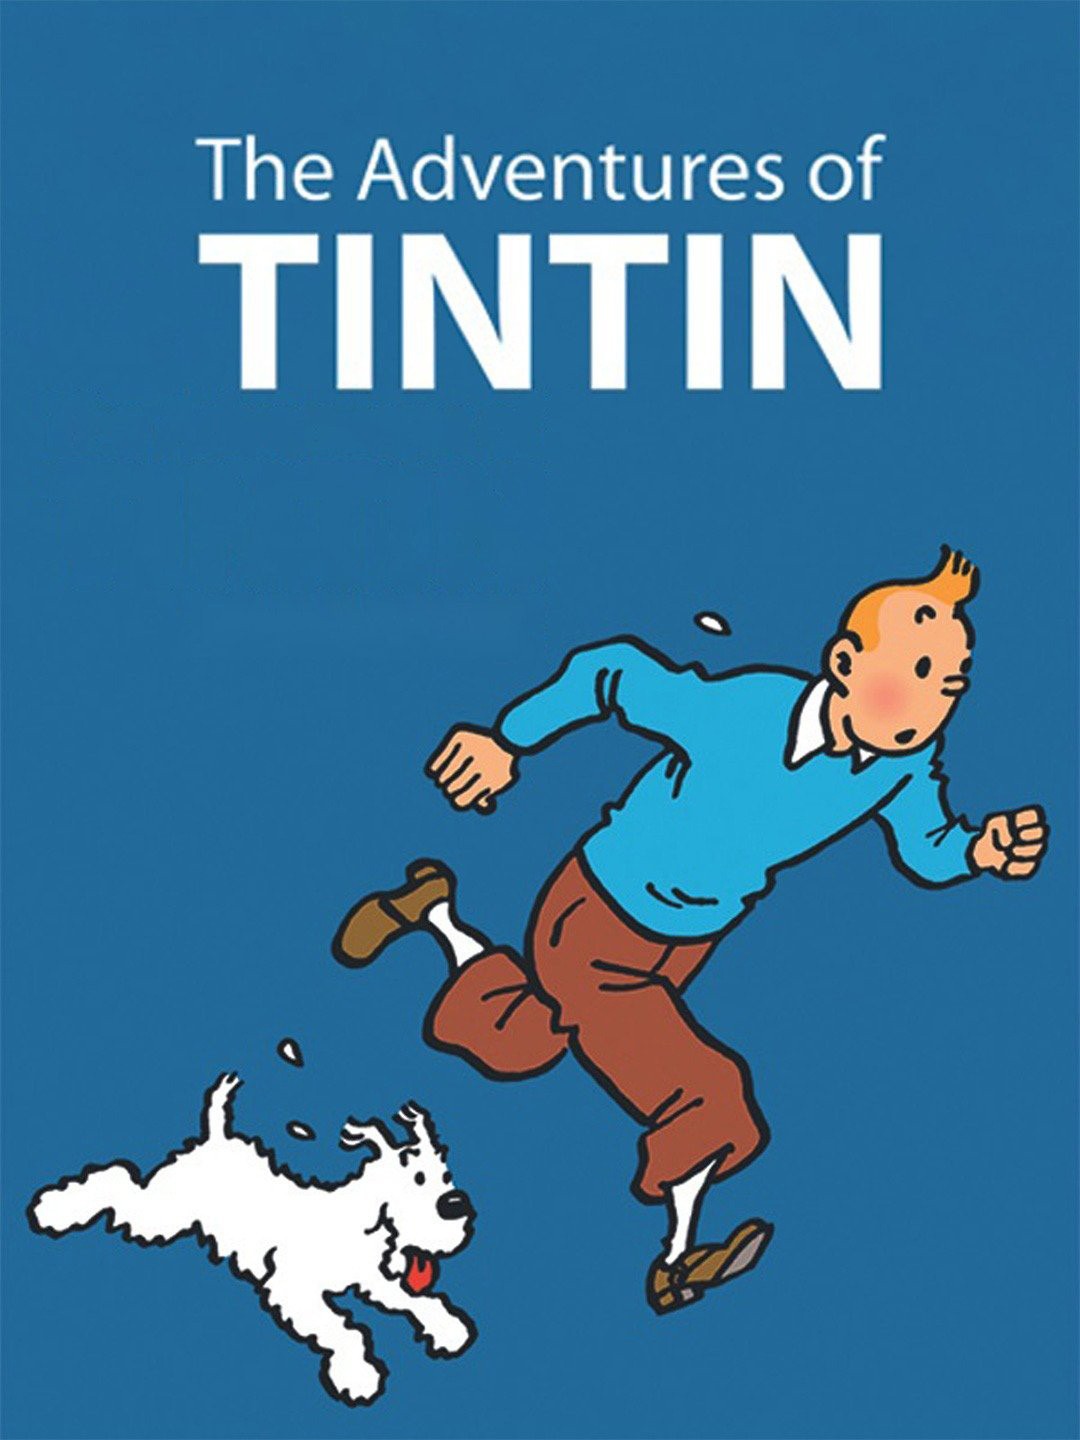 The Adventures of Tintin review - All About Symbian